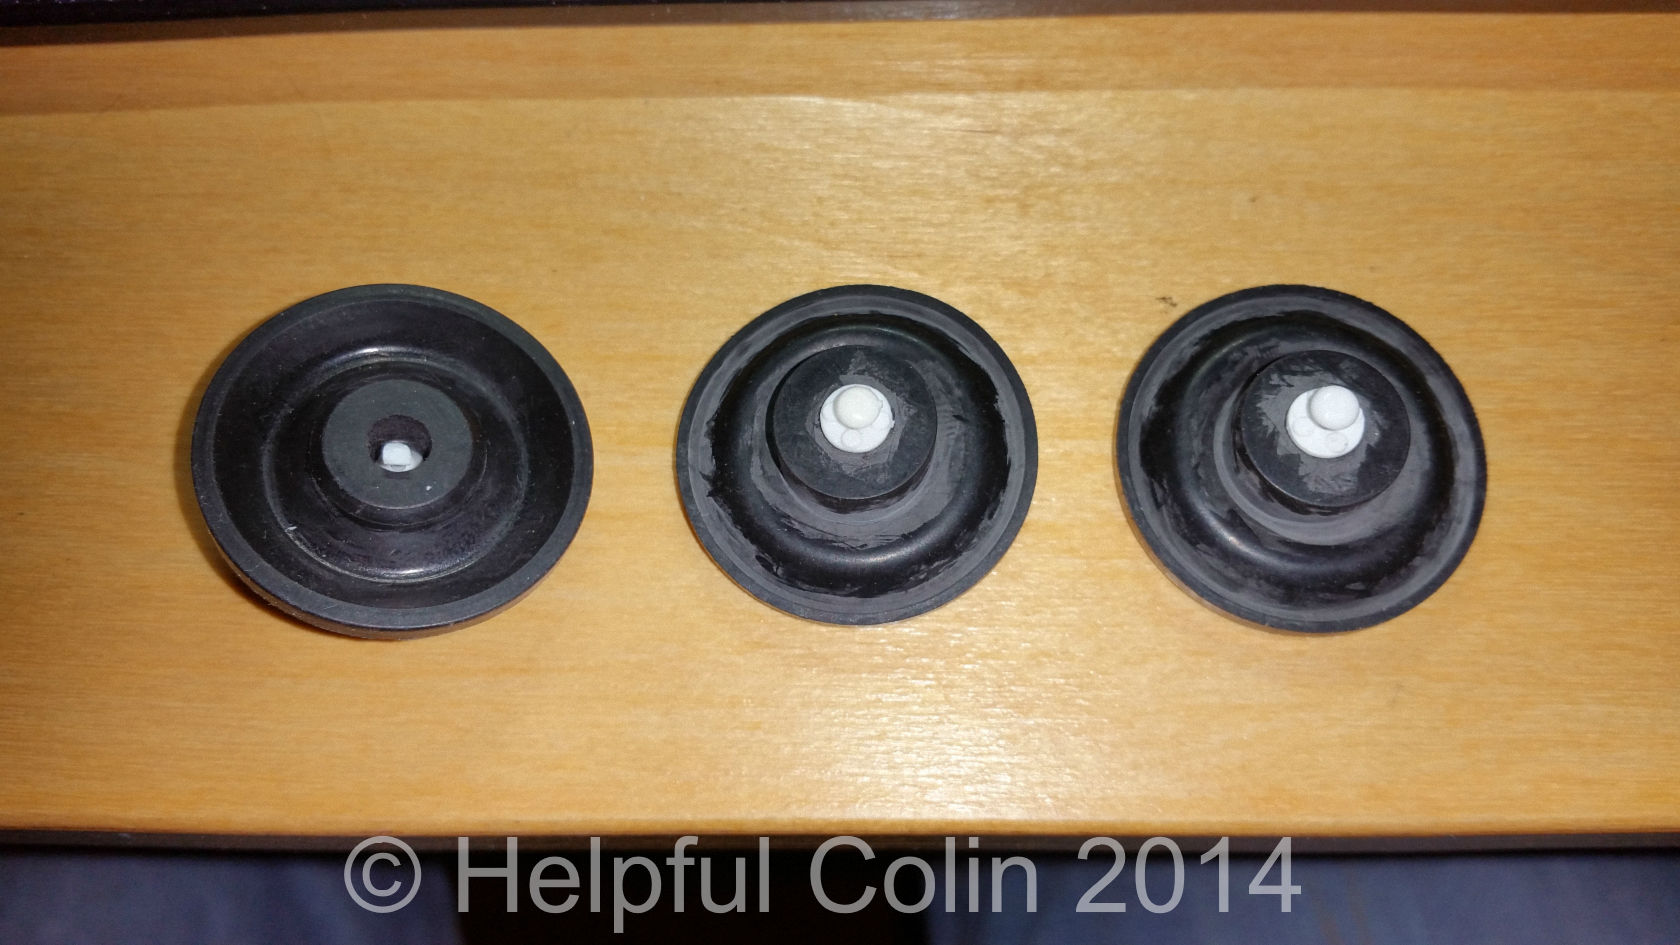 3 New Diaphragms With White Pins.